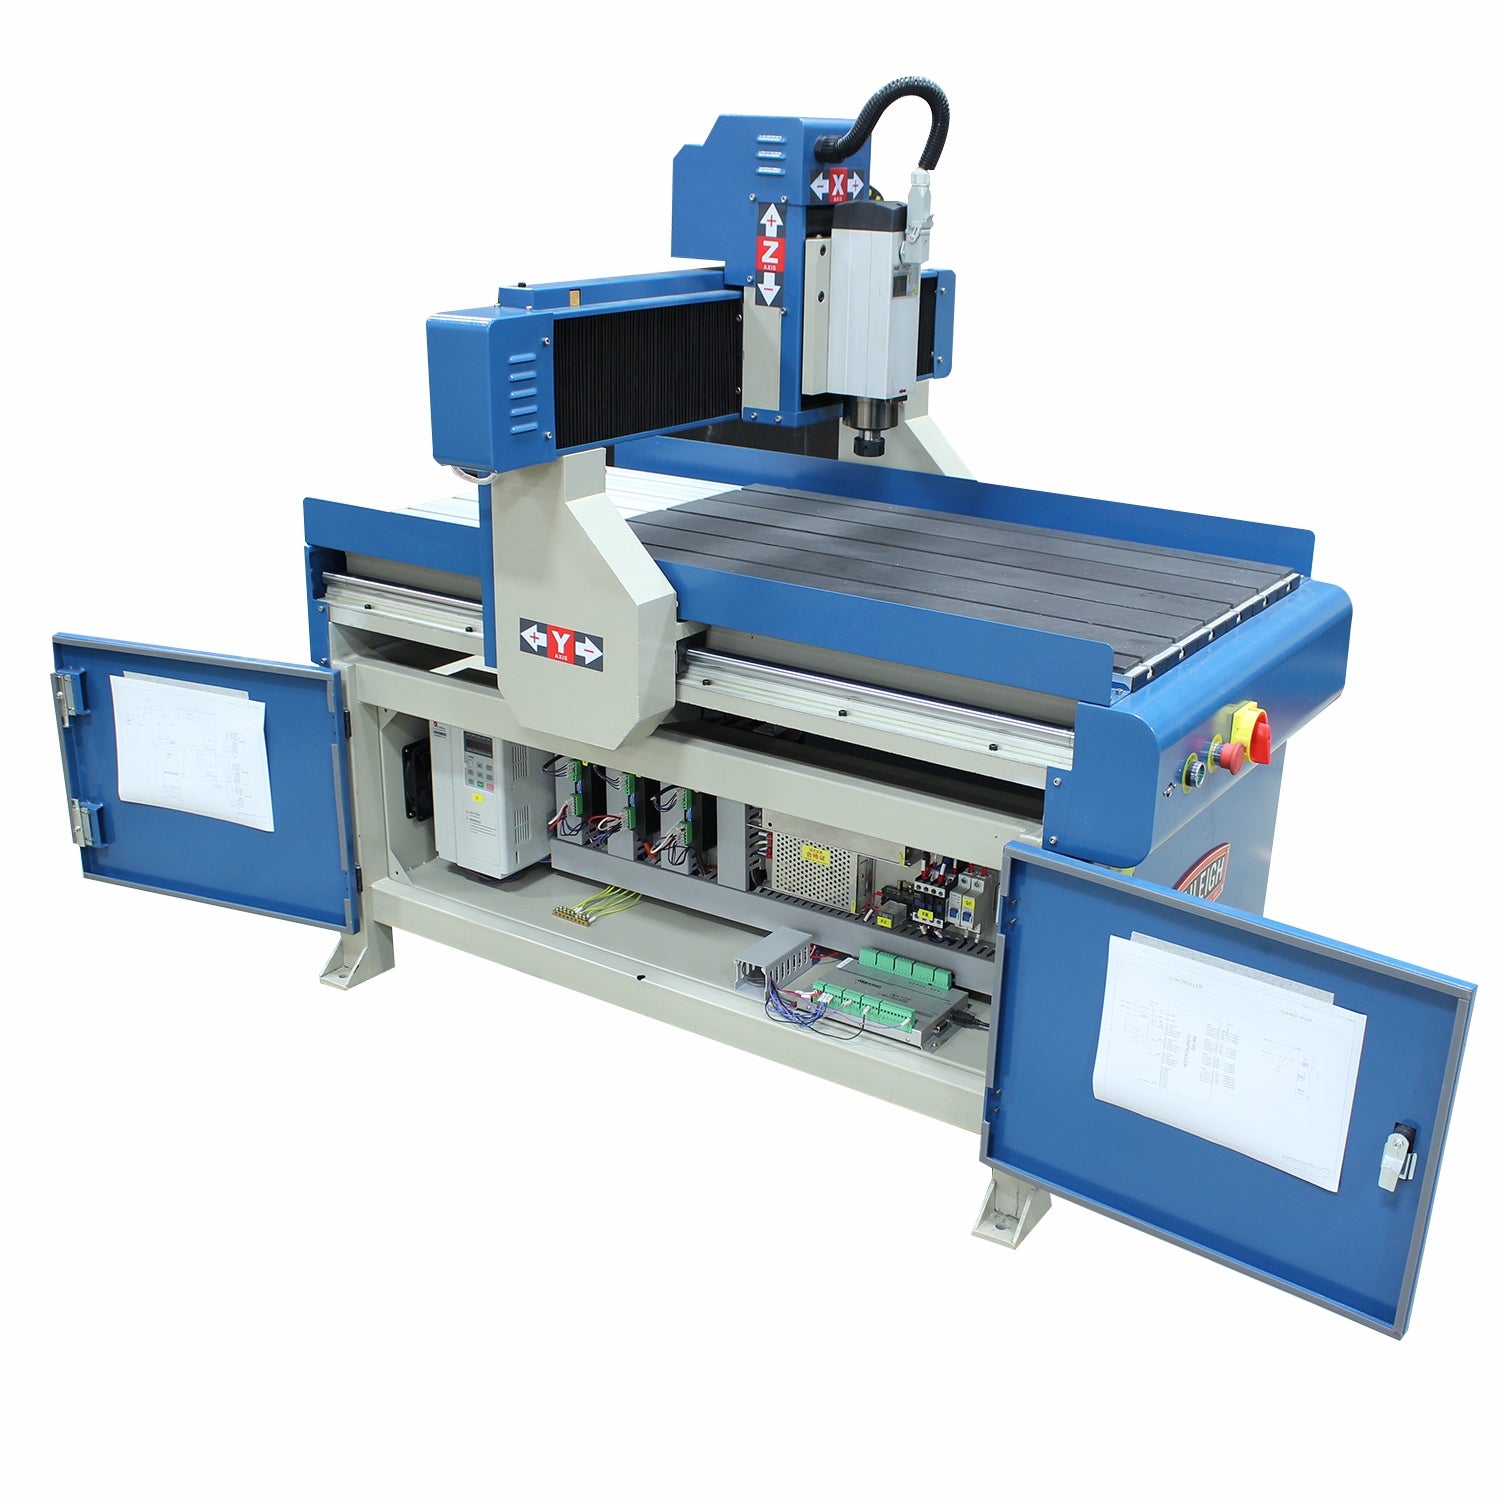 Baileigh WR-32 220V 1 Phase 2' x 3' CNC Advertising Router Table, 4.2hp Spindle, and Software Package